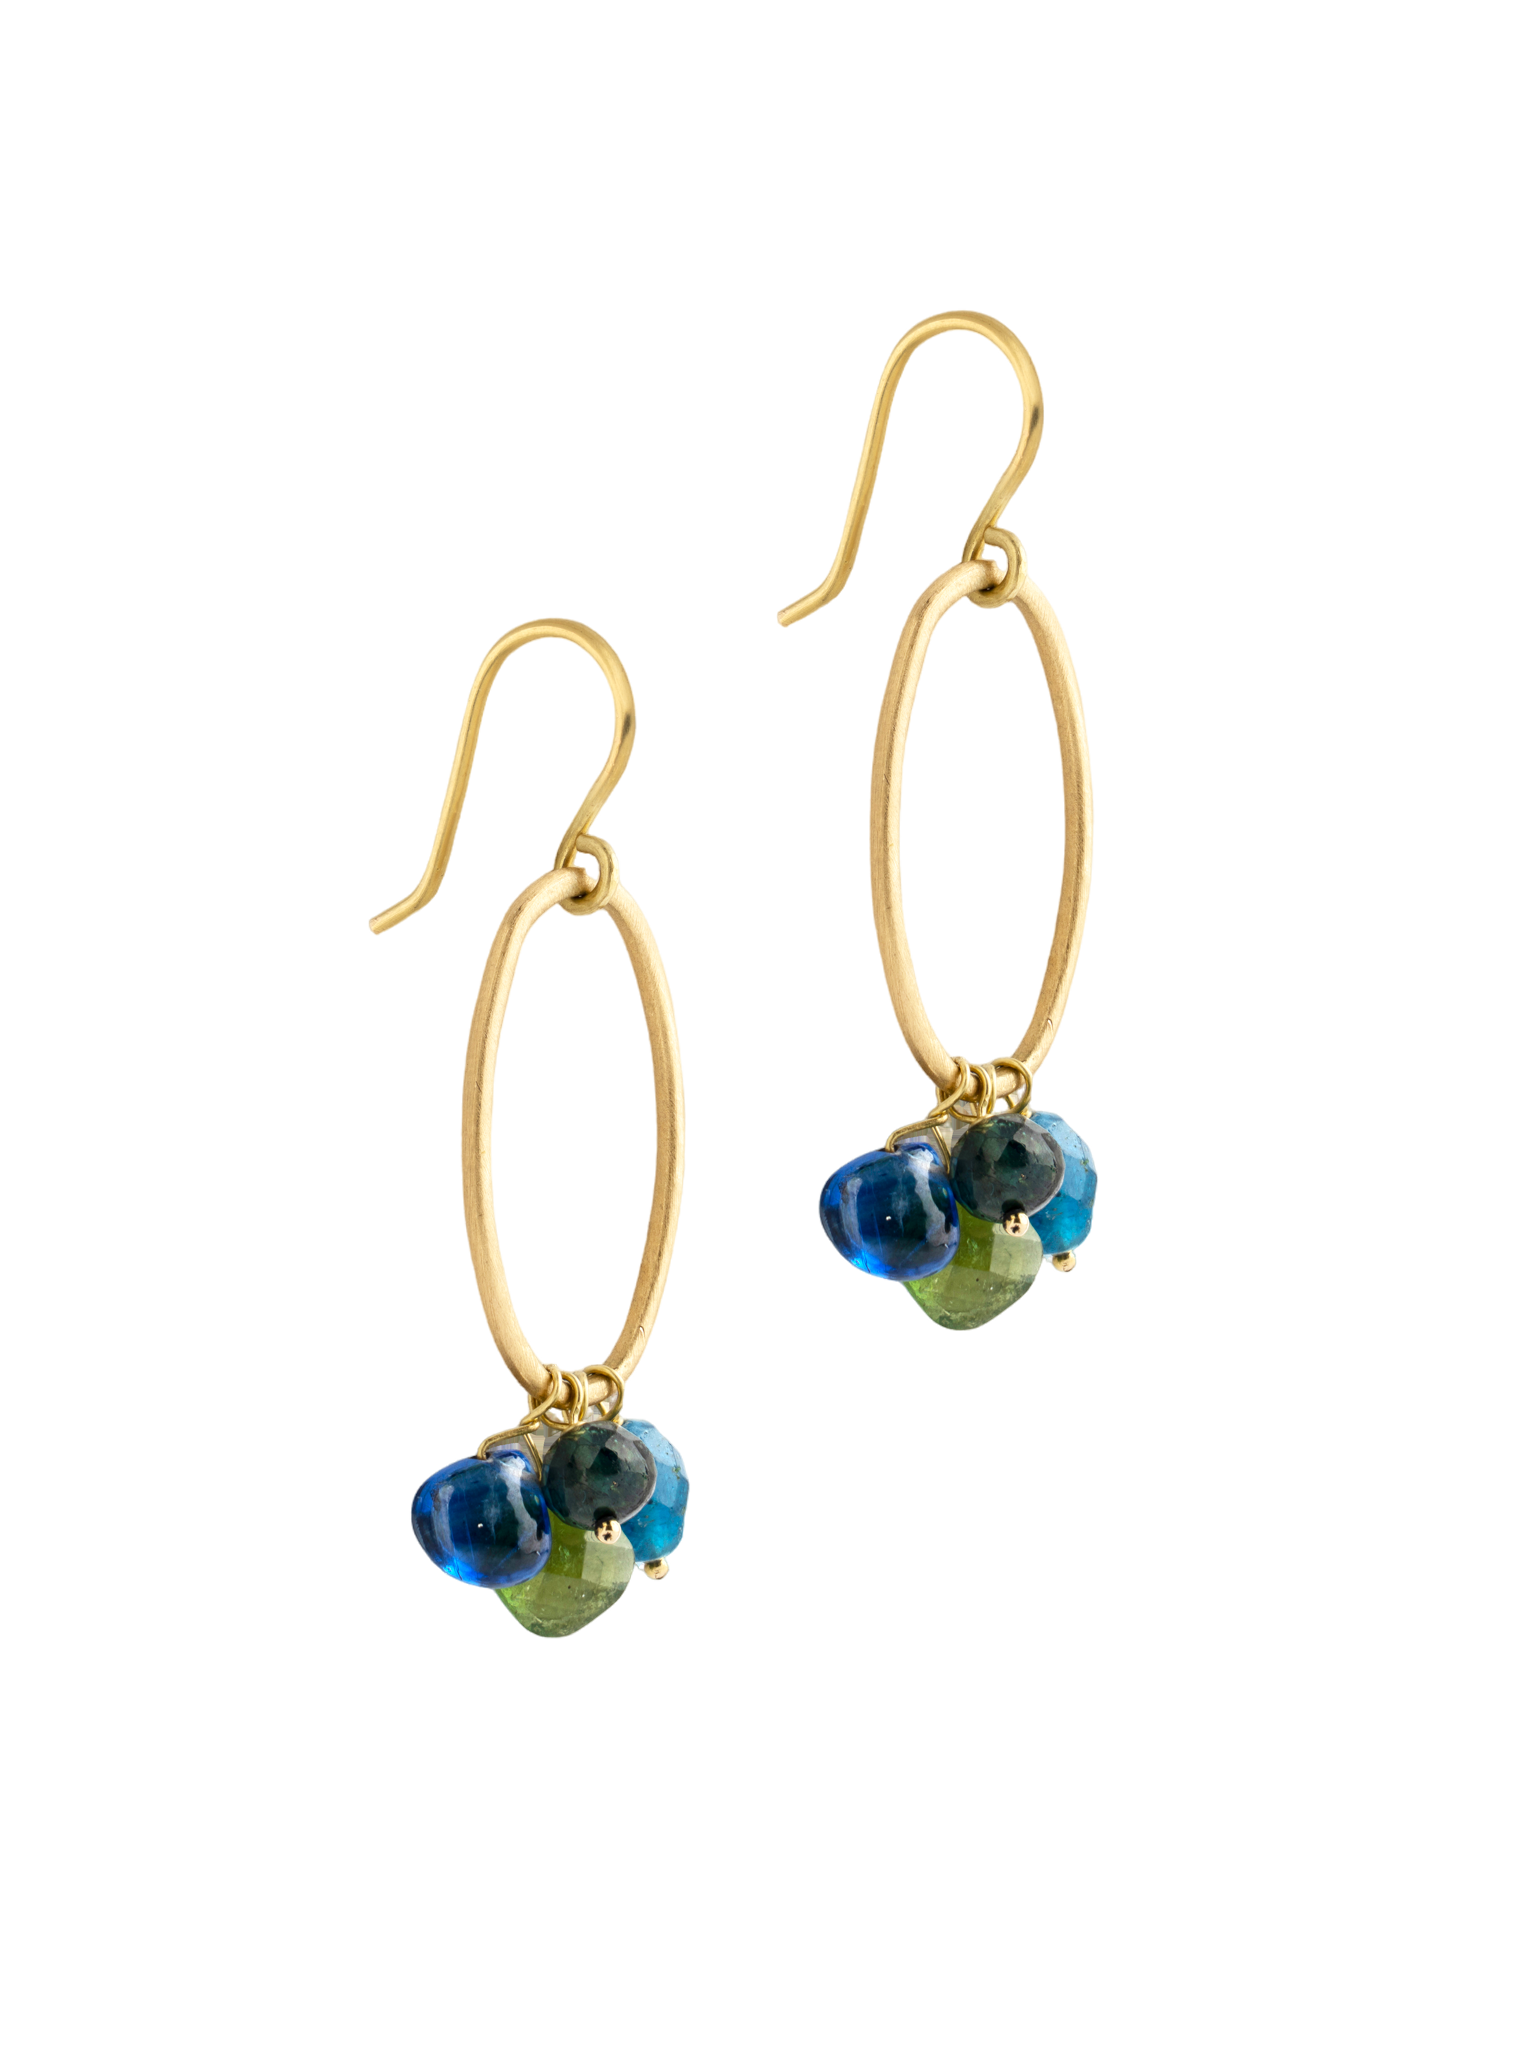 Iolite, tourmaline and gold earrings